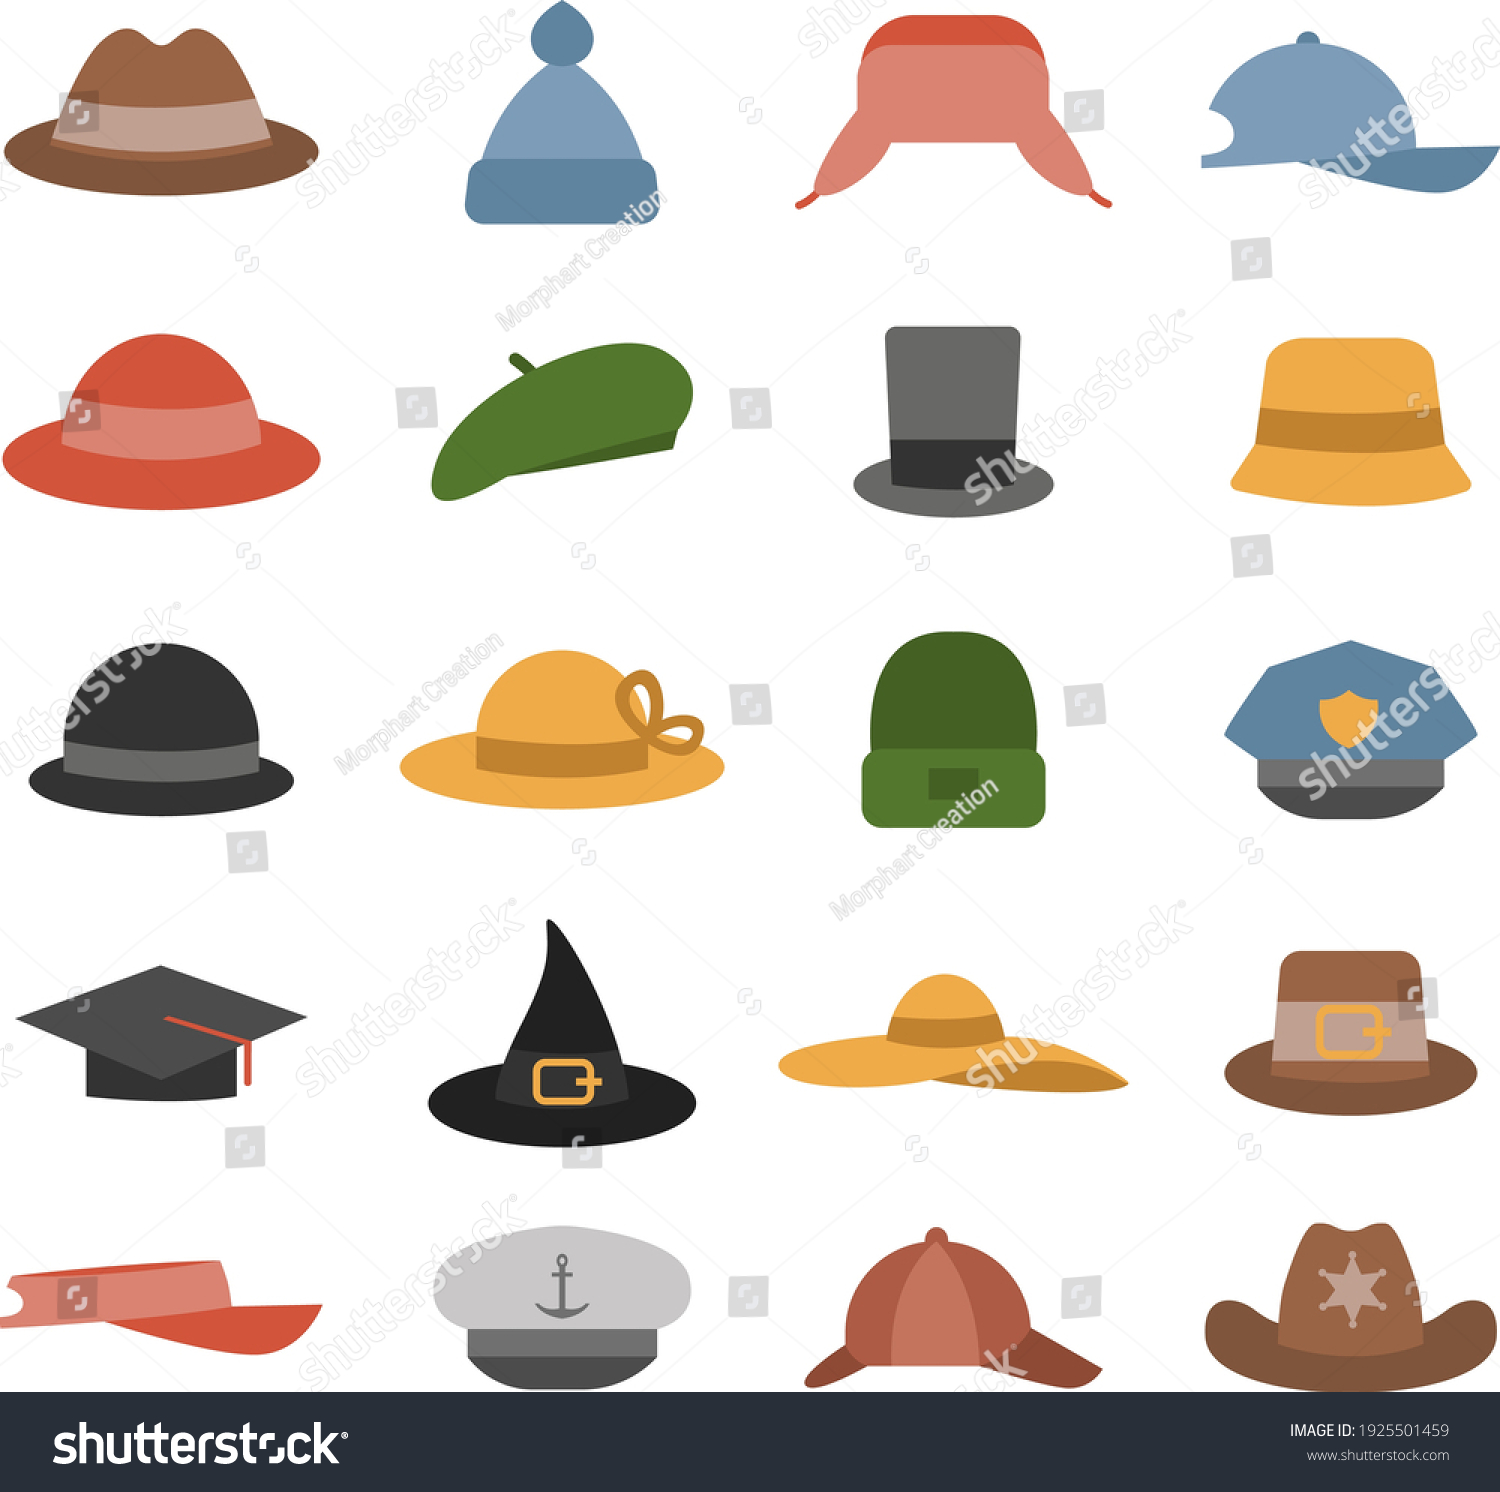 Types Hats Illustration Vector On White Stock Vector (Royalty Free ...